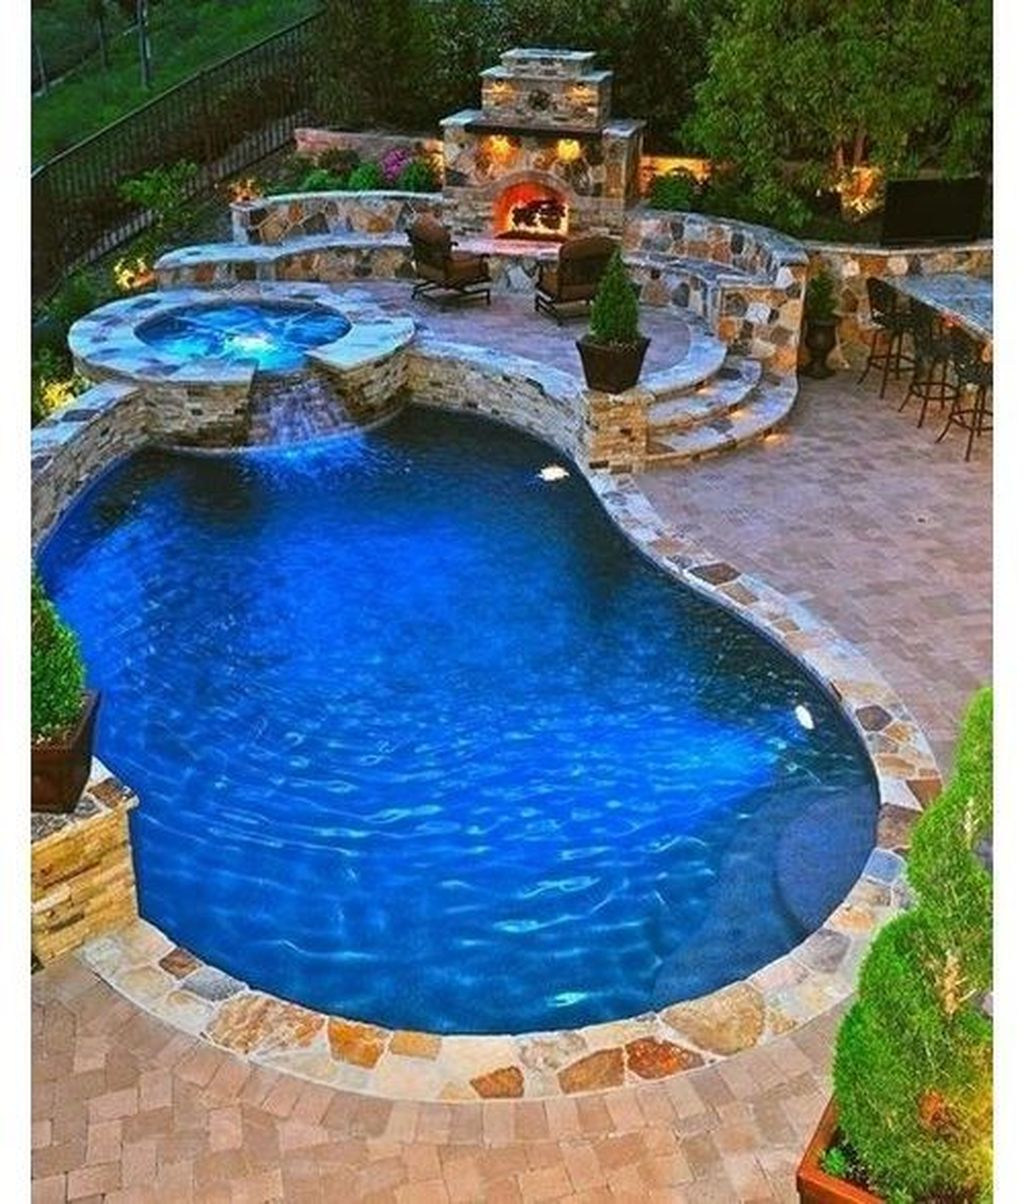 Cozy Swimming Pool Design Ideas For Your Home Backyard20